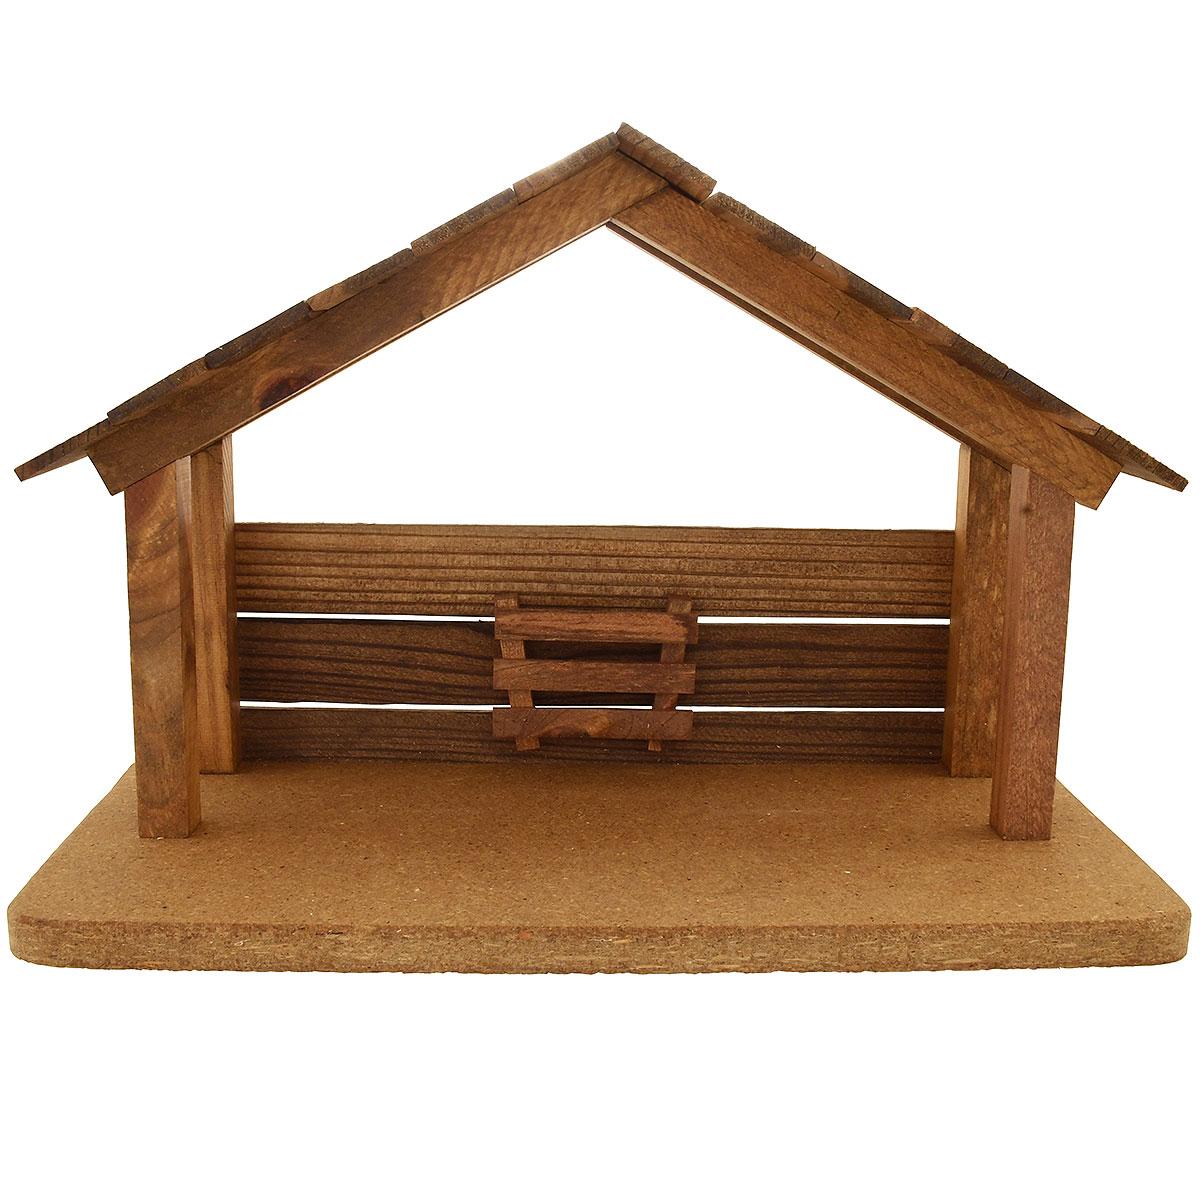 Handcrafted Wooden Stable